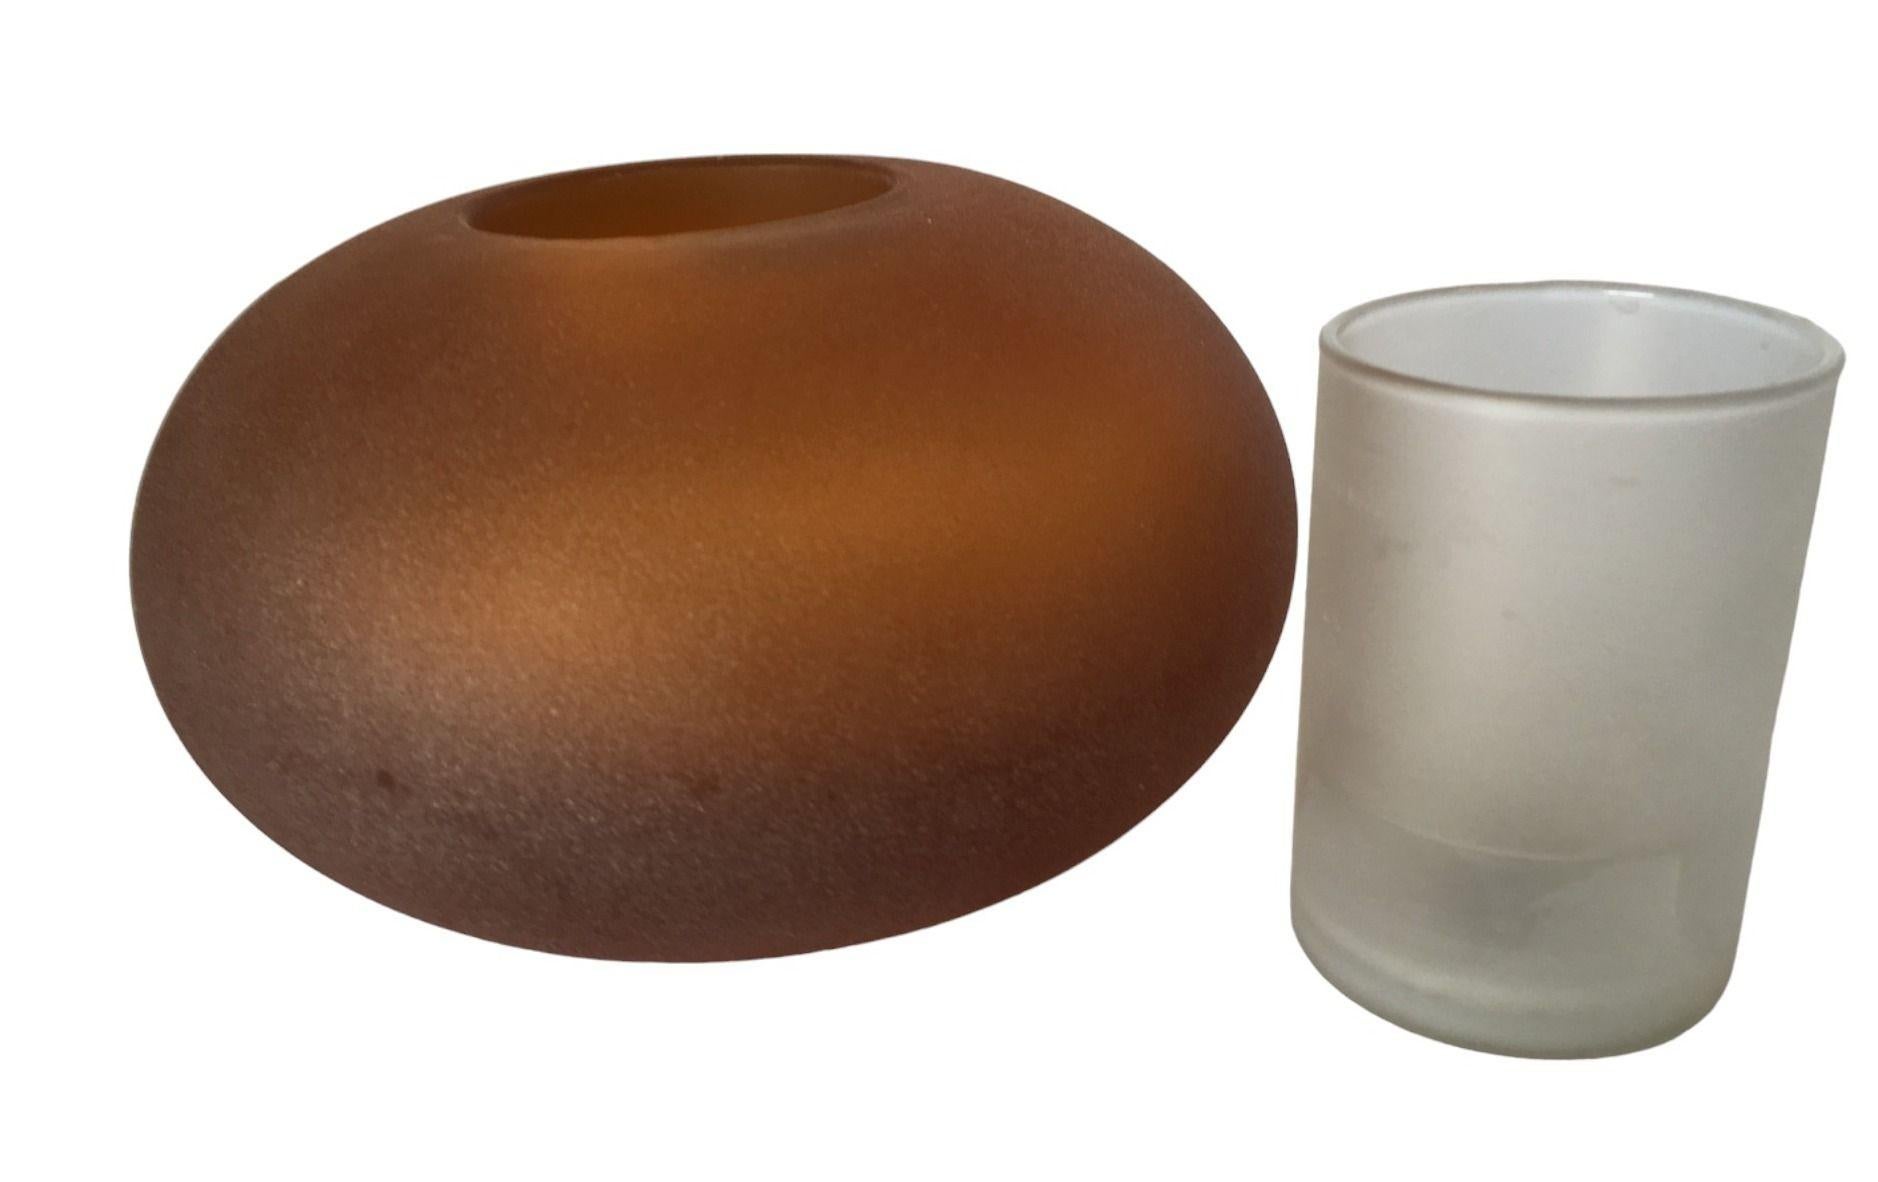 Infuse warmth and a touch of nostalgia into your space with this captivating set of Vintage Round Amber Candle Holders. Crafted to perfection, each holder comes adorned in a rich amber hue that exudes a timeless charm. The set includes three candle